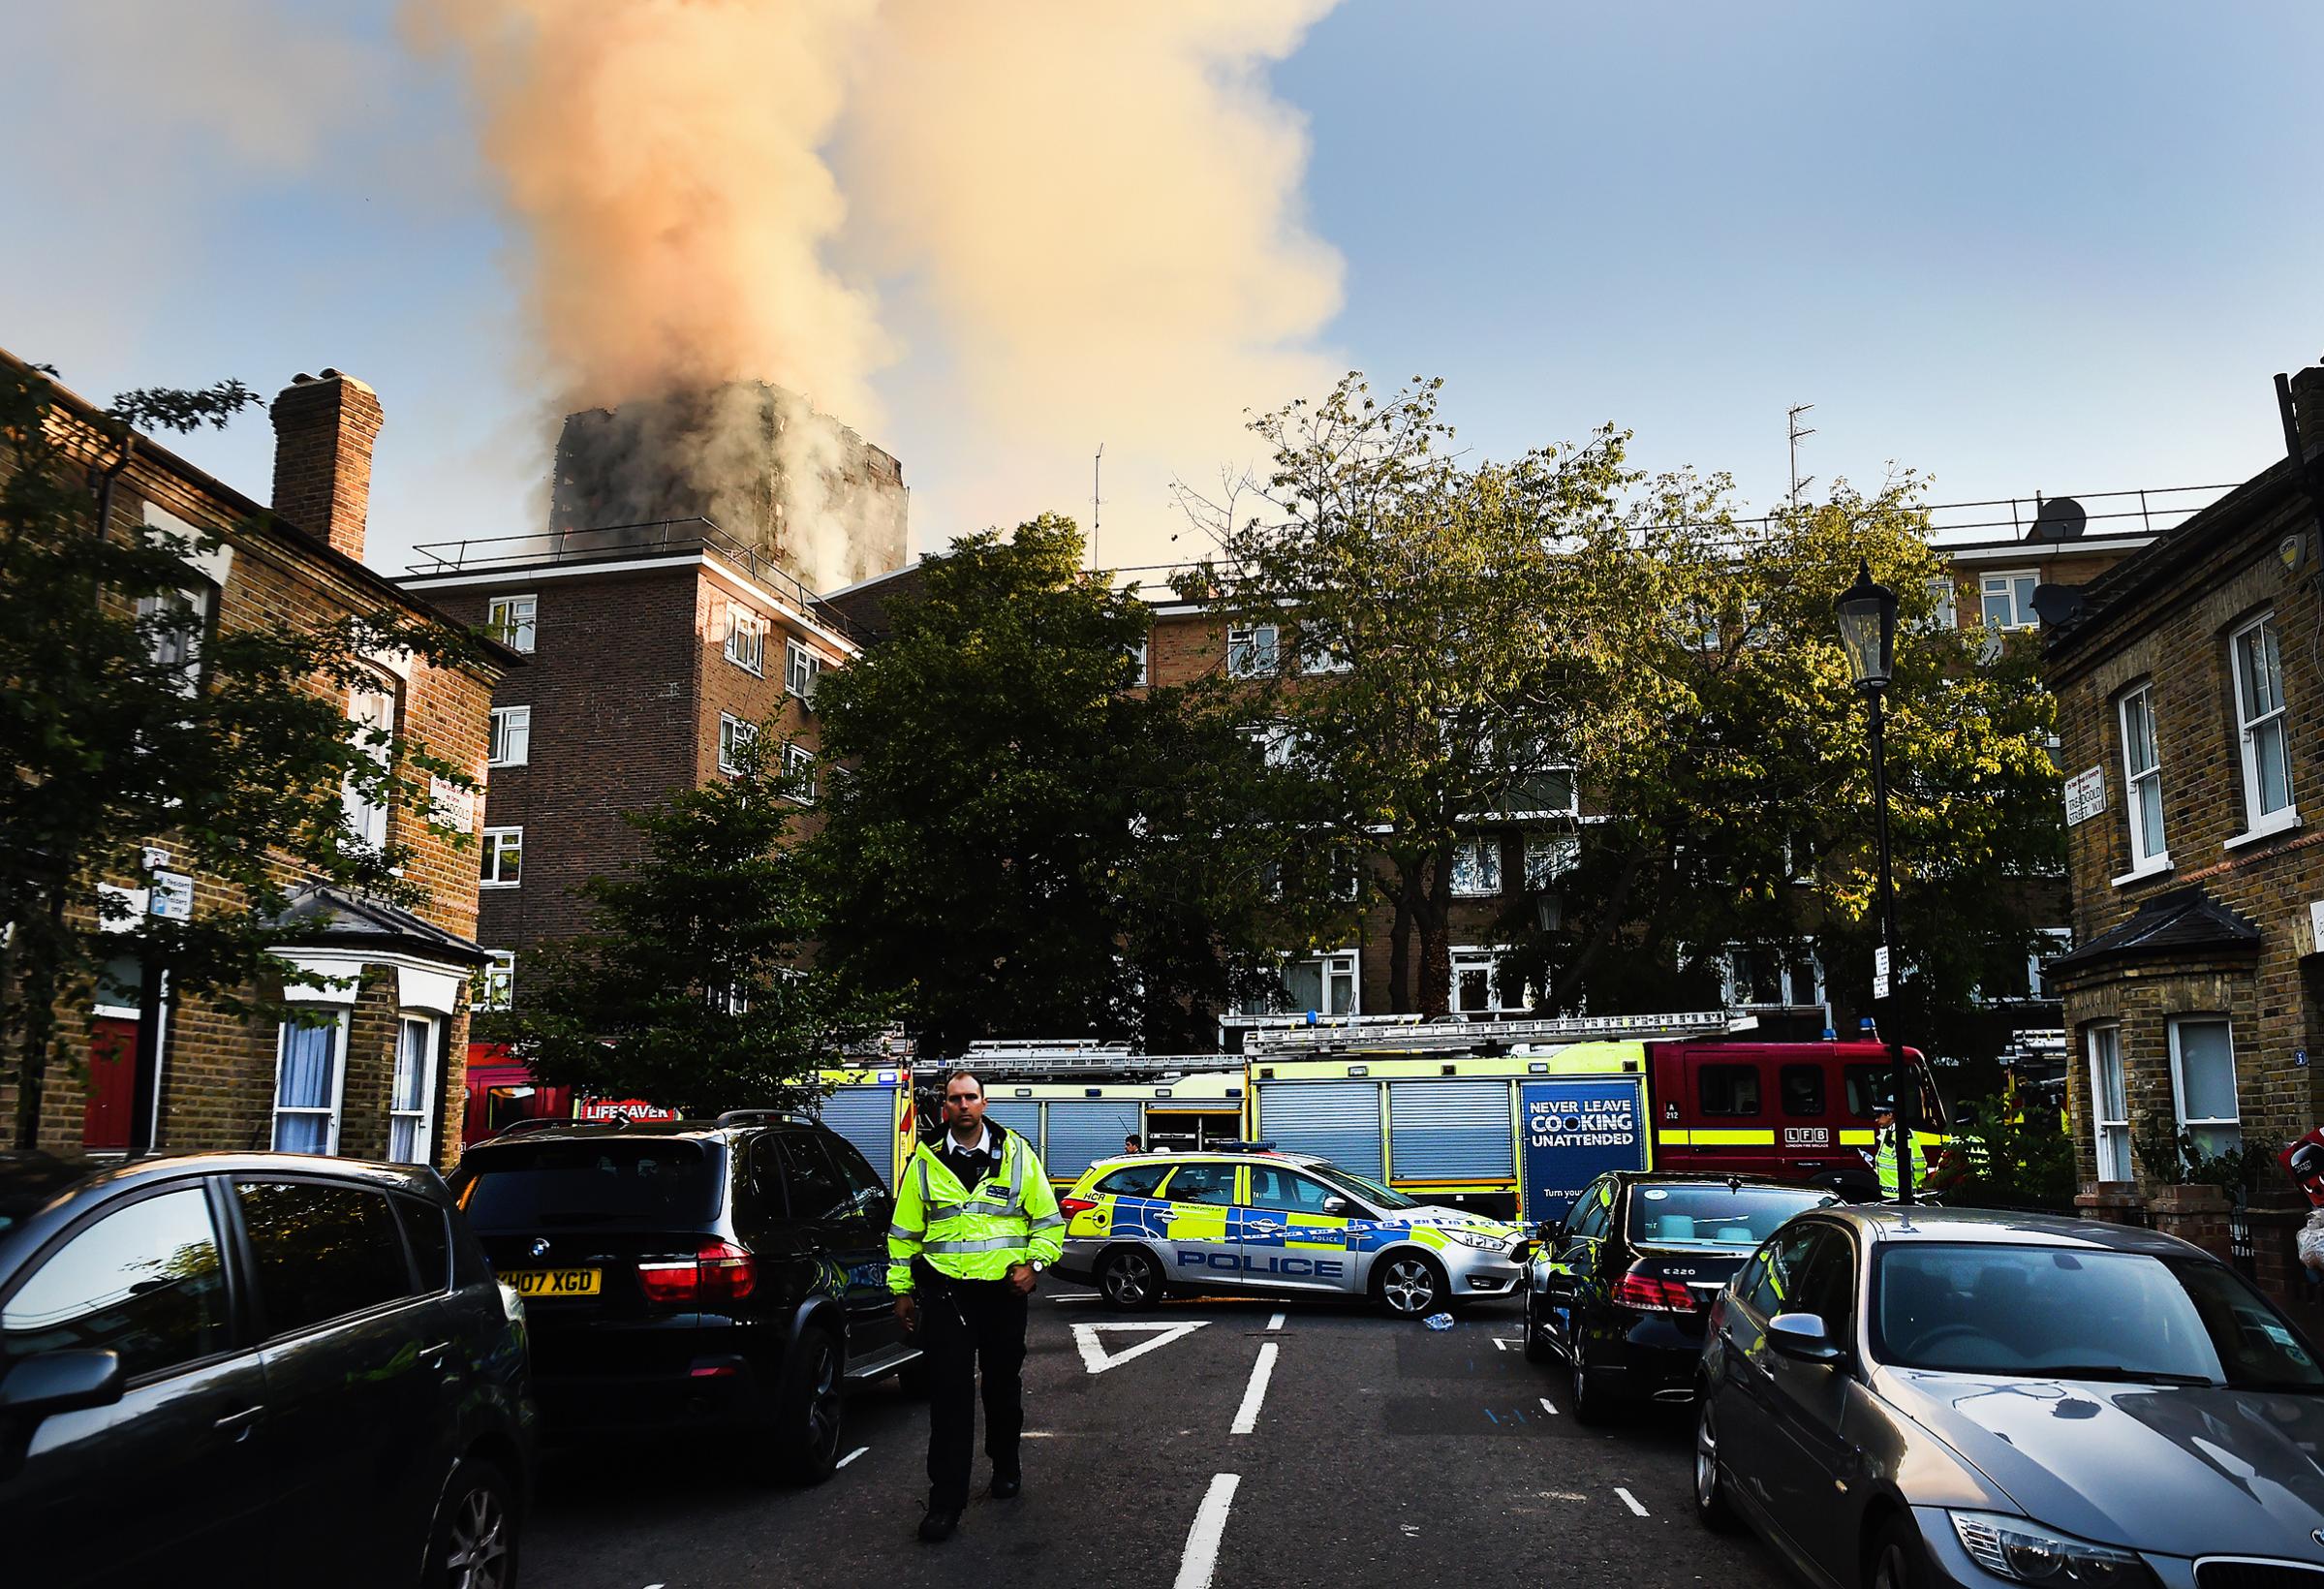 Police and rescue services operate near the fire at the Grenfell Tower apartment block in North Kensington, London, on June 14, 2017.